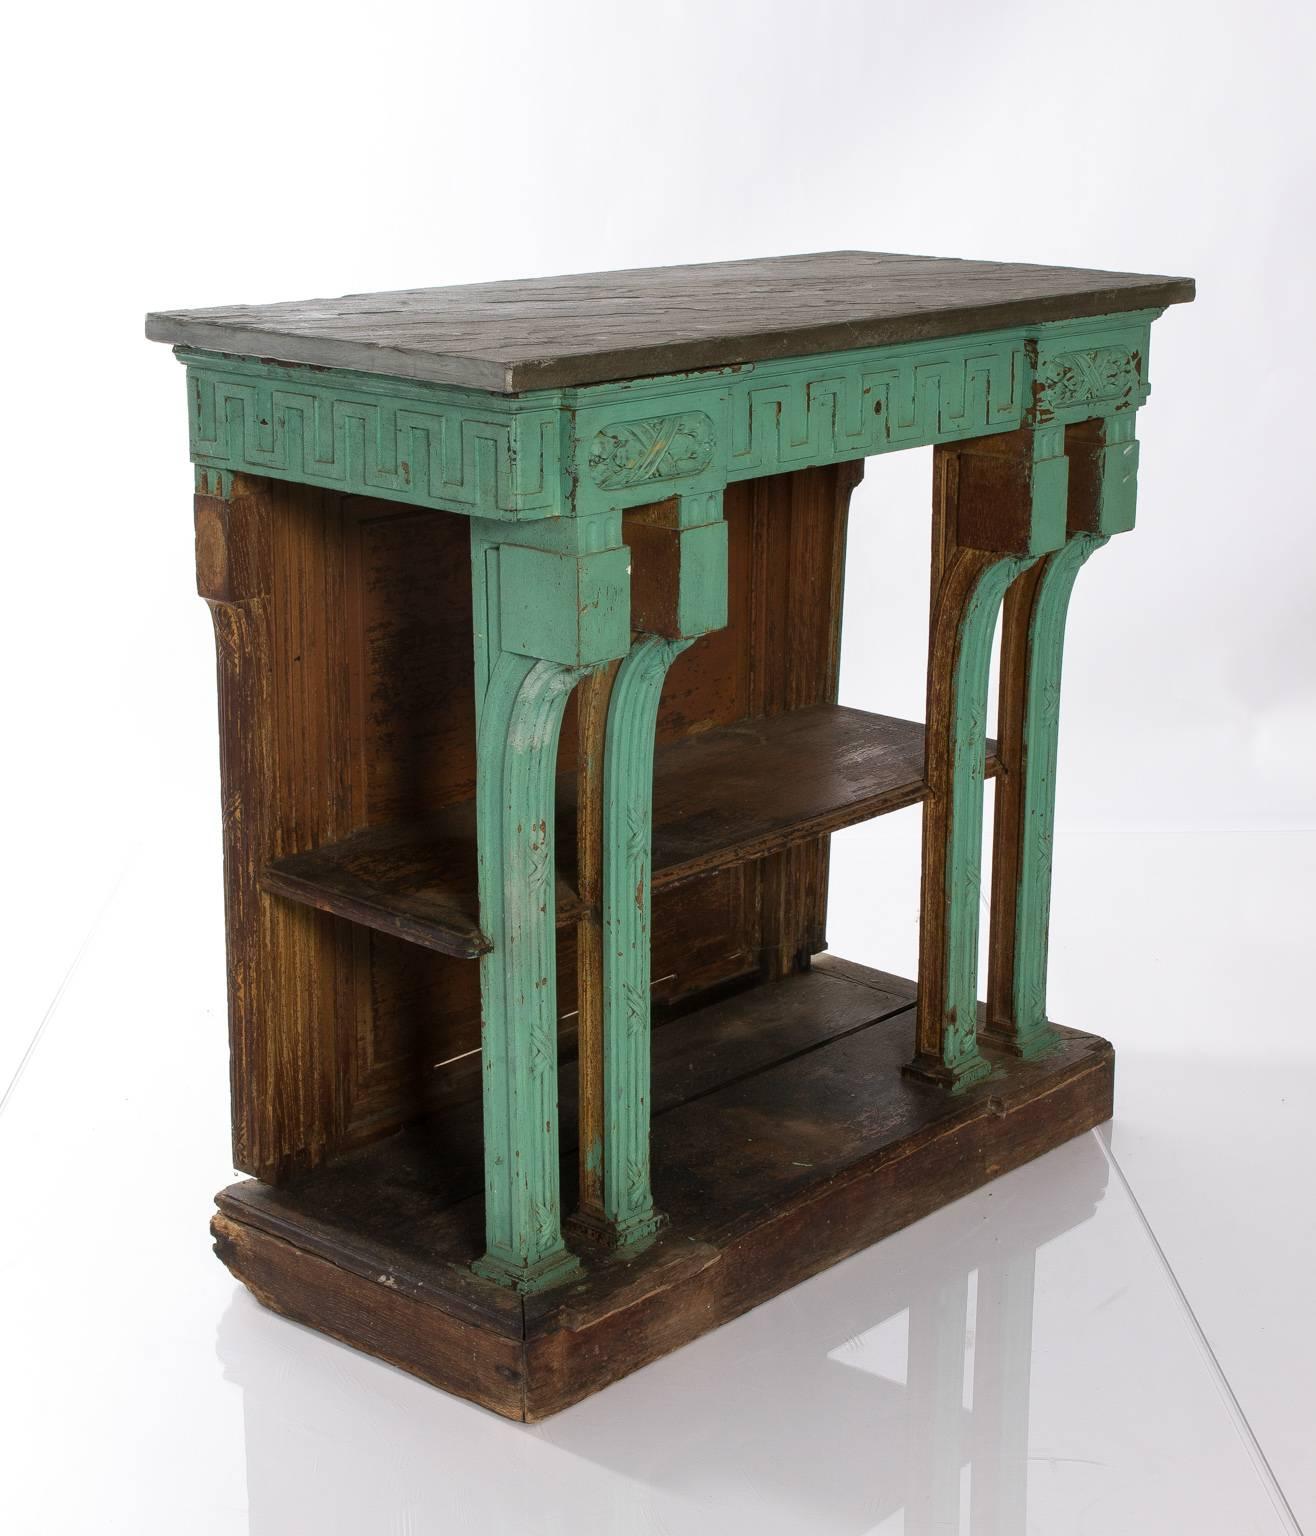 Painted French Country Garden Console